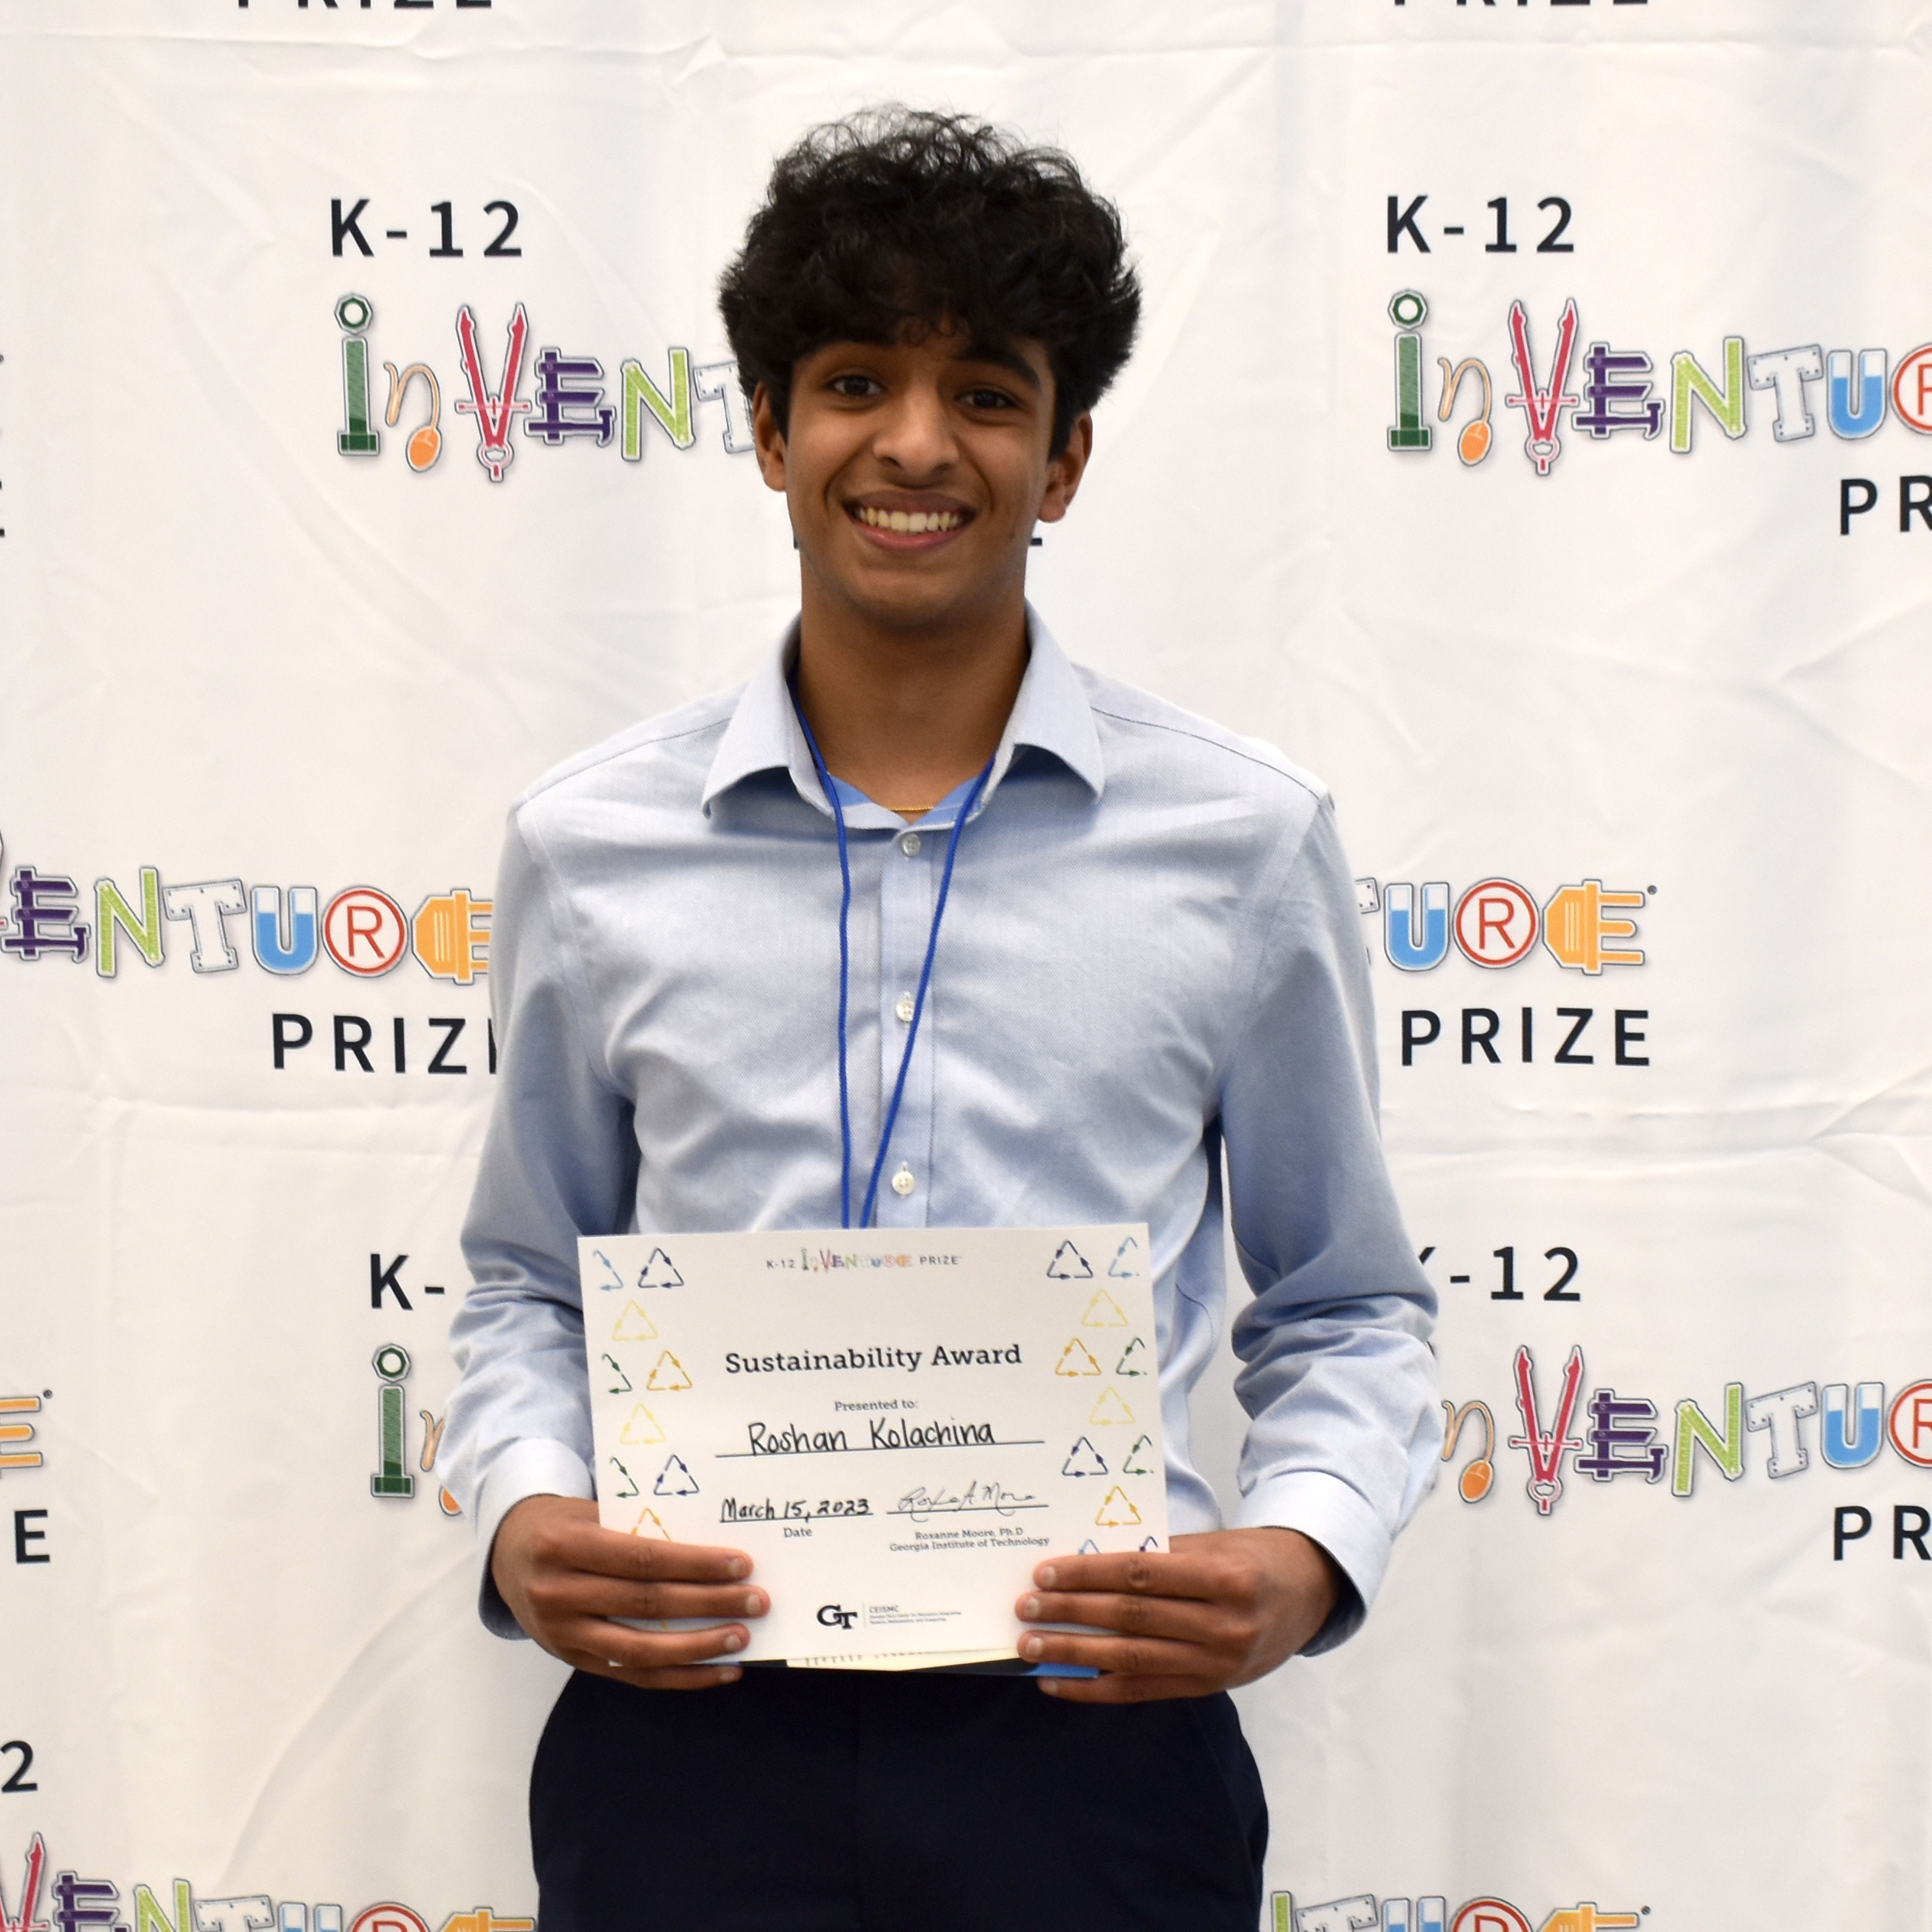 A smiling student holding up a certificate